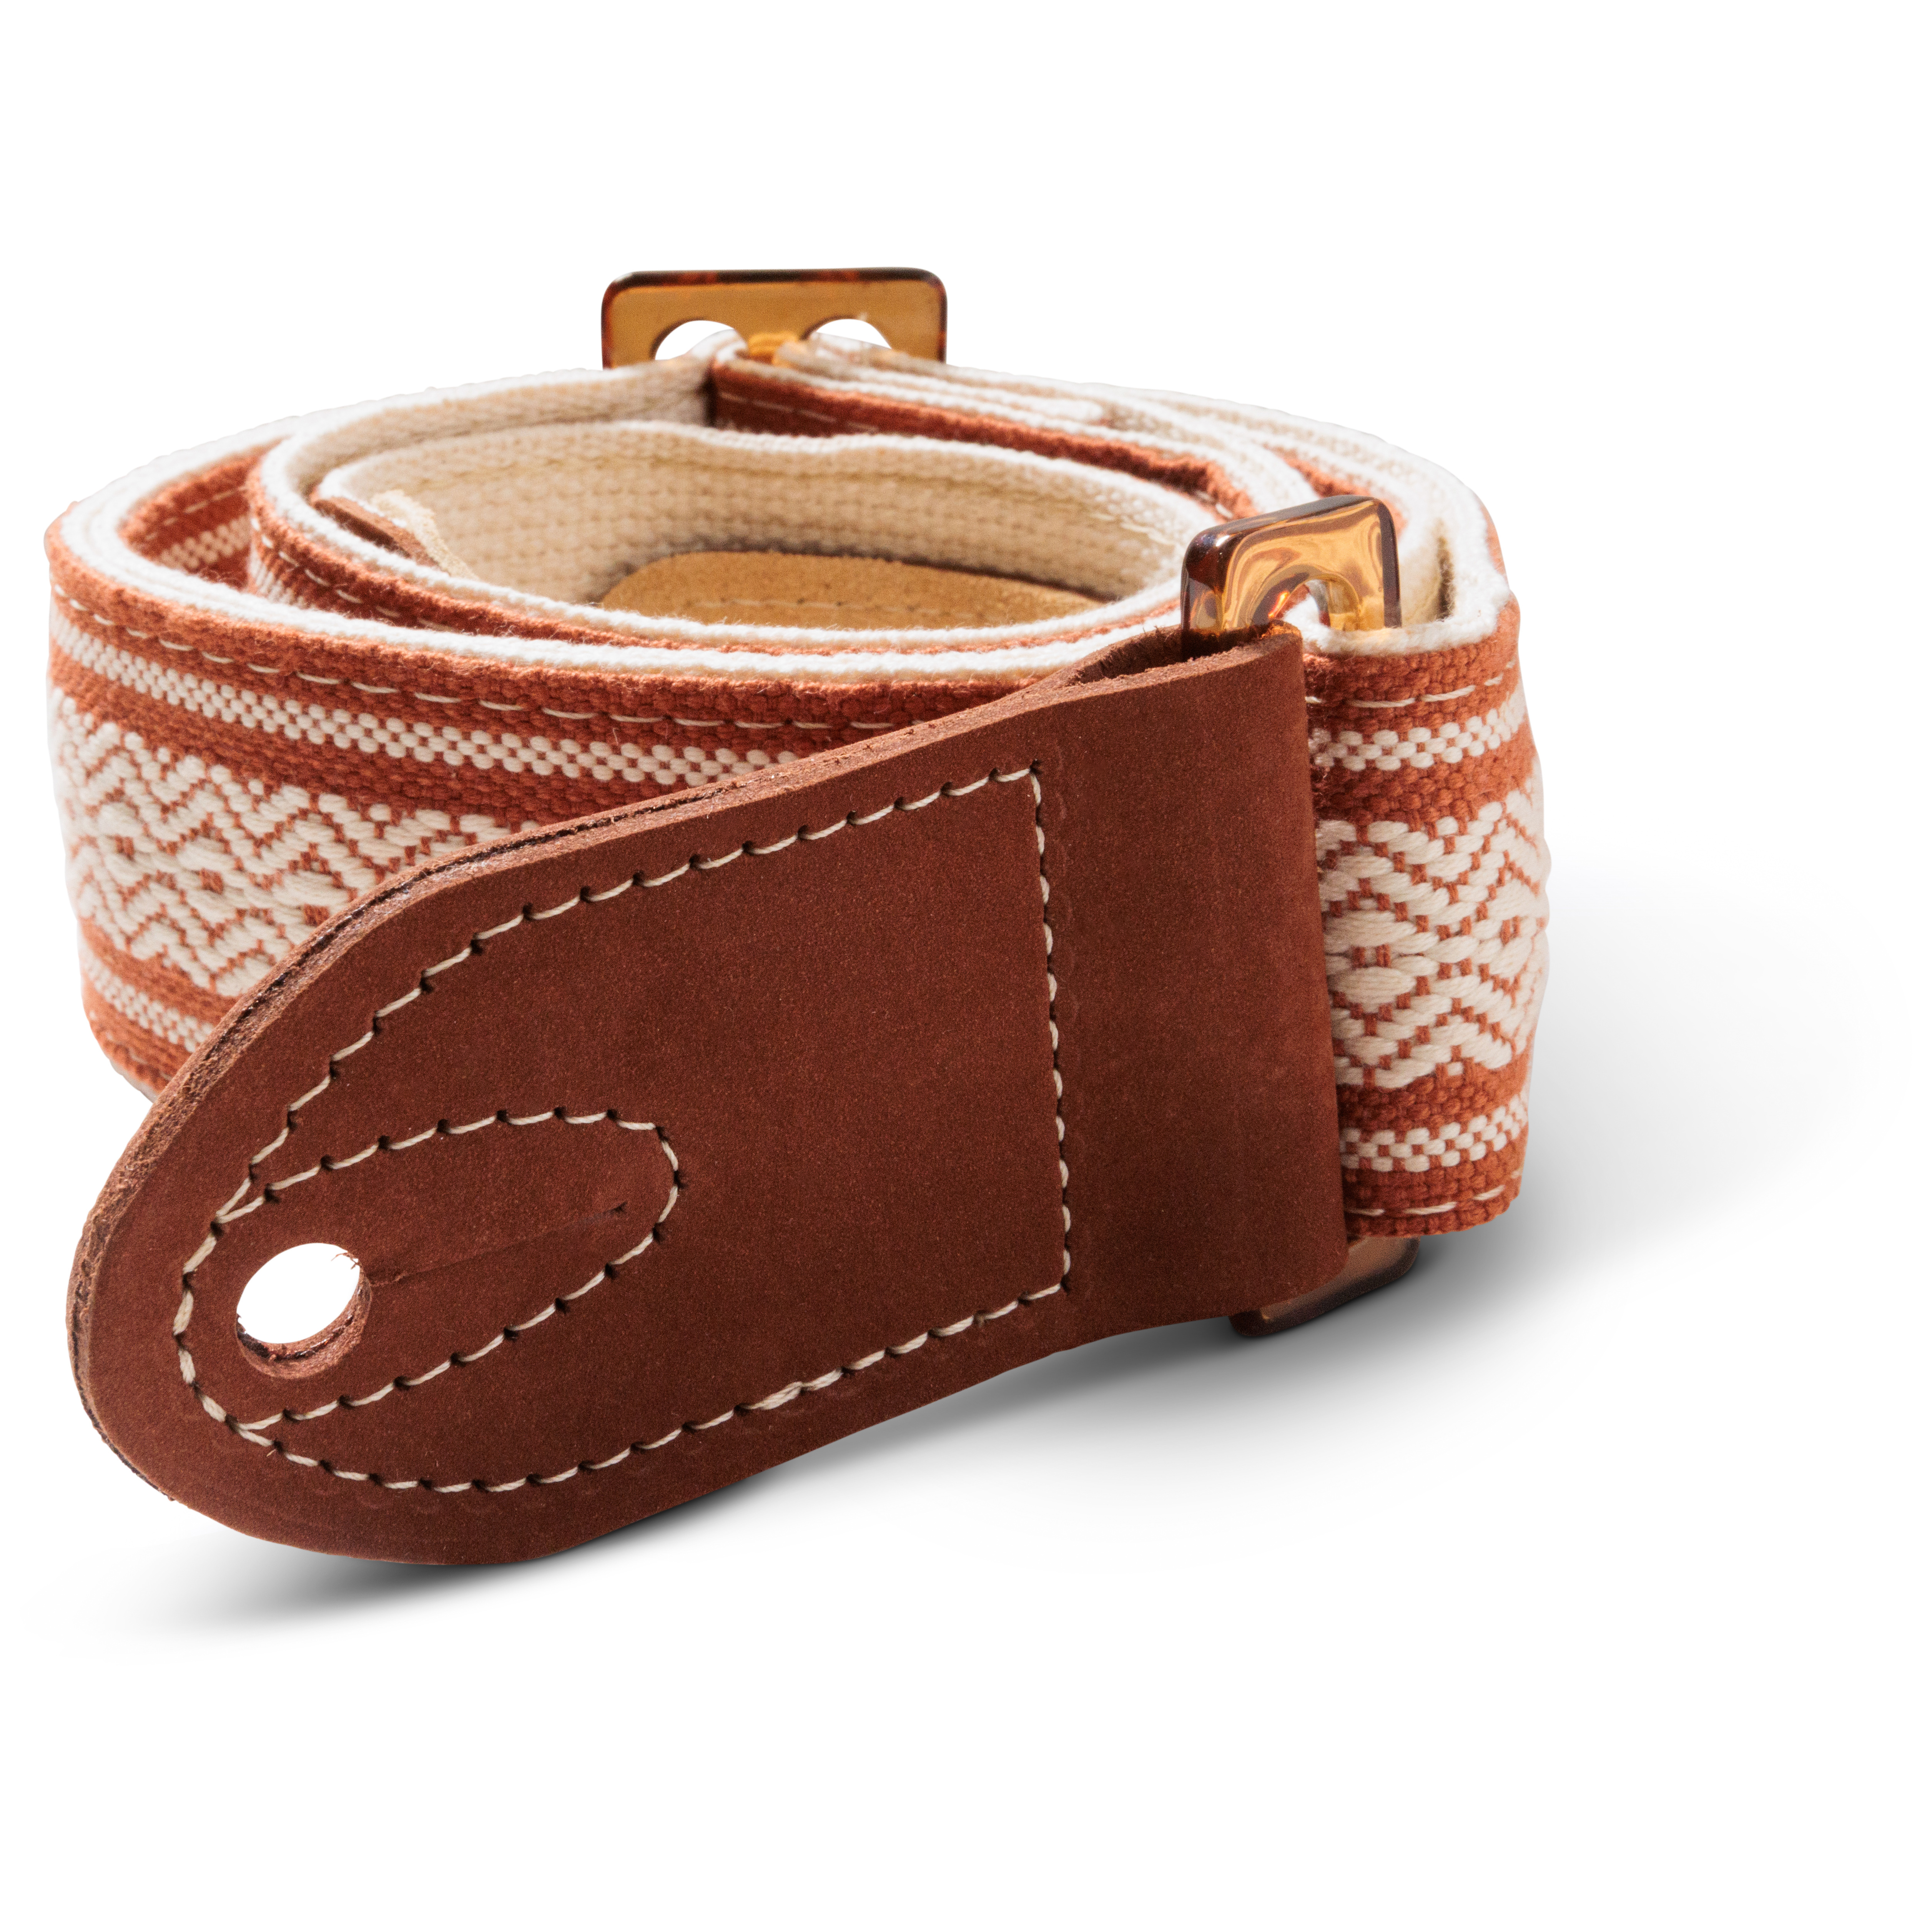 Taylor Academy Strap White/Brown 2